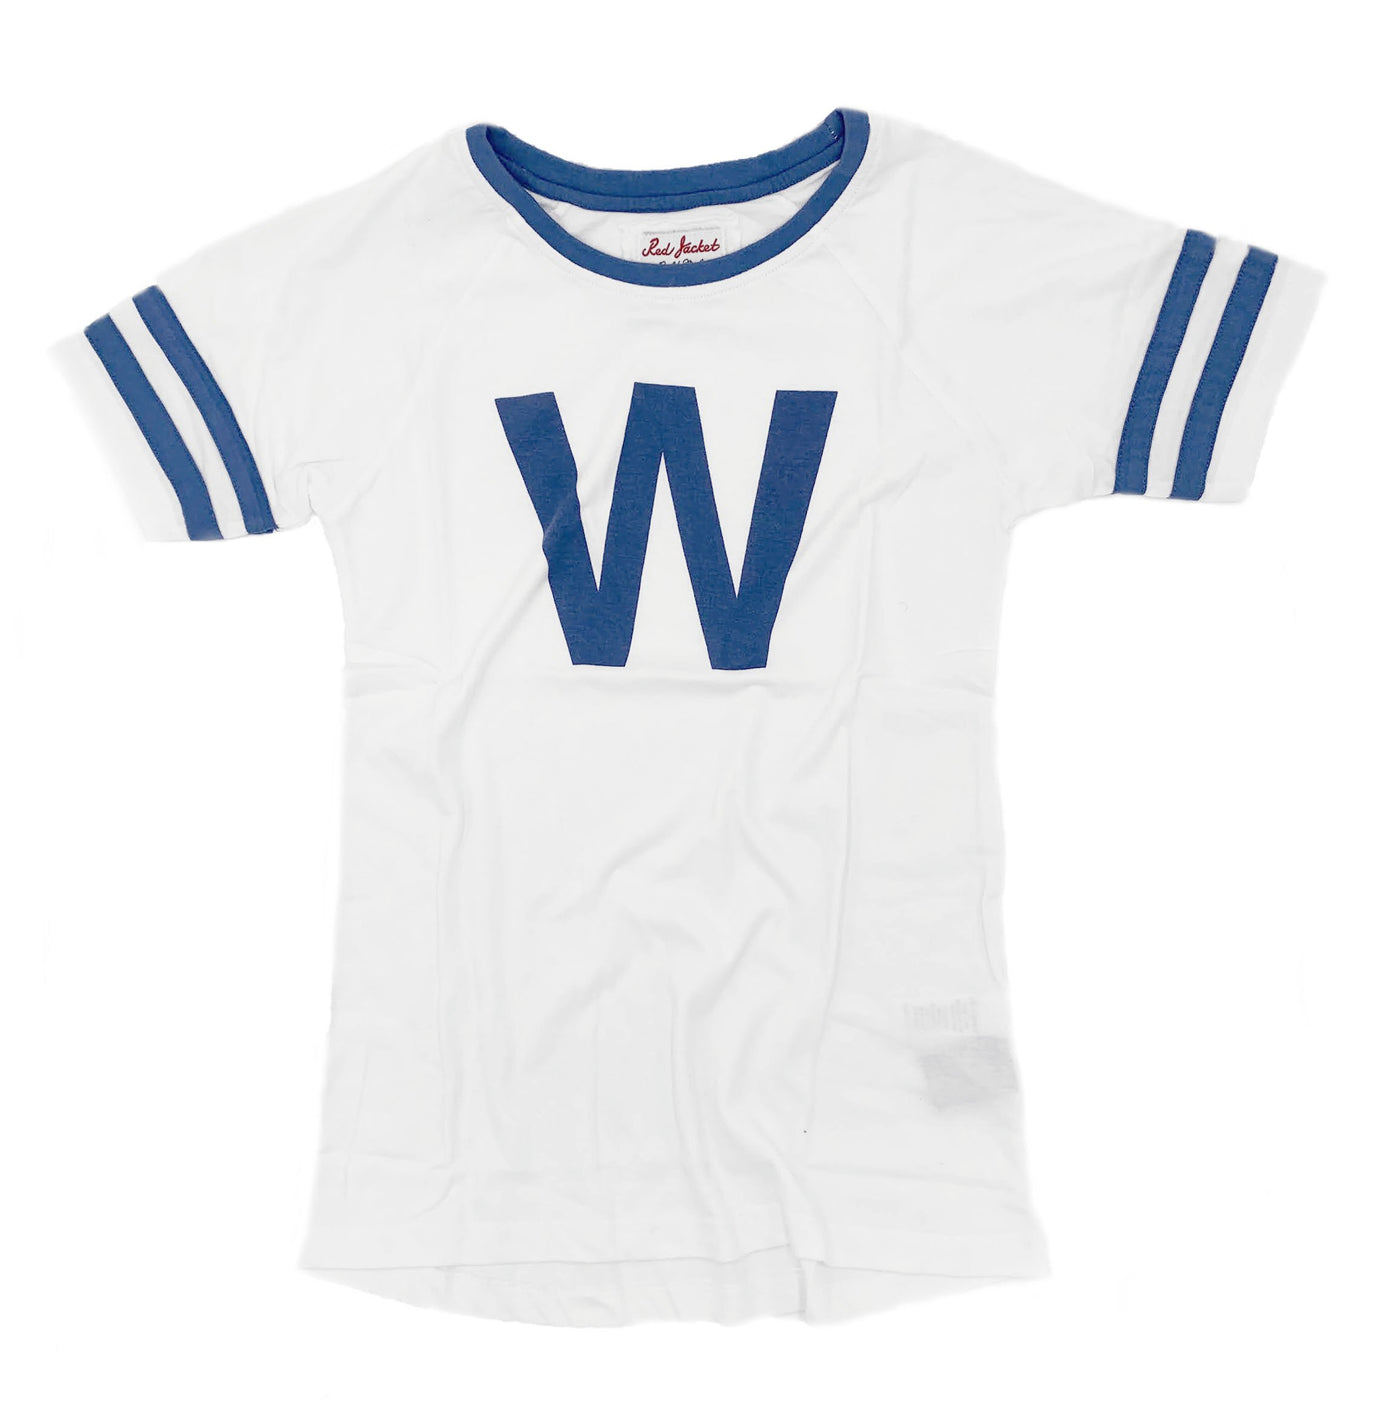 DELTA W FLAG CHICAGO CUBS TEE - Ivy Shop